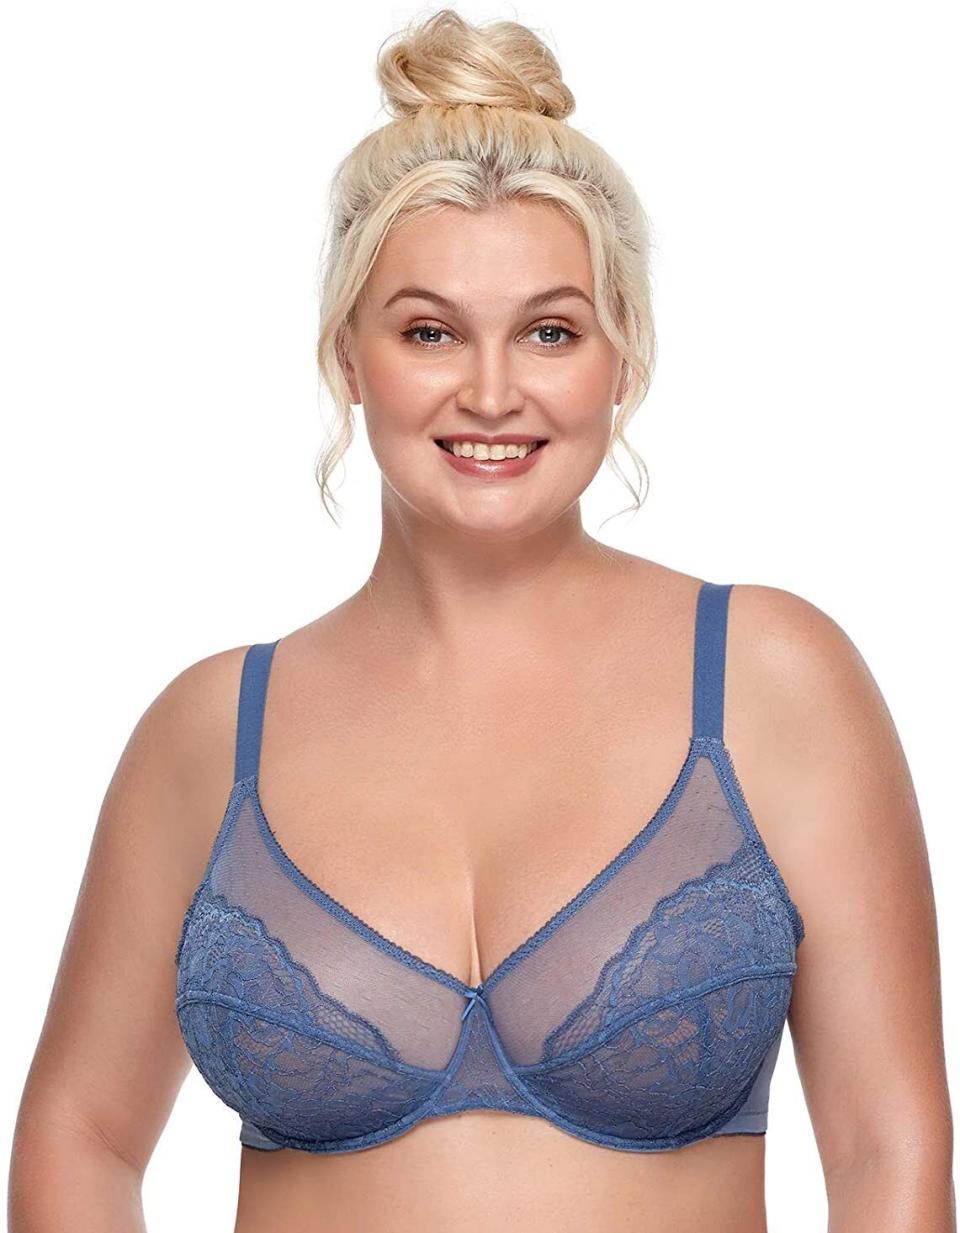 It'll always be there to offer you the support you need.<br /><br /><strong>Promising review:</strong> "Great bra, I wasn't sure how this was gonna work out since I don't buy bras online, but it turned out pretty good. Color is pretty true, sizing is also true, and I find it really comfortable because of the thick band. Doesn't dig into my armpits and doesn't ride up from behind. It's pretty light and thin, so far it's a great purchase." &mdash; <a href="https://amzn.to/3gy0MTG" target="_blank" rel="noopener noreferrer">Sipeish</a><br /><br /><strong>Get it from Amazon for <a href="https://amzn.to/3gy0MTG" target="_blank" rel="noopener noreferrer">$17.84+</a> (available in 21 colors, and sizes 32C-44DDD).</strong>